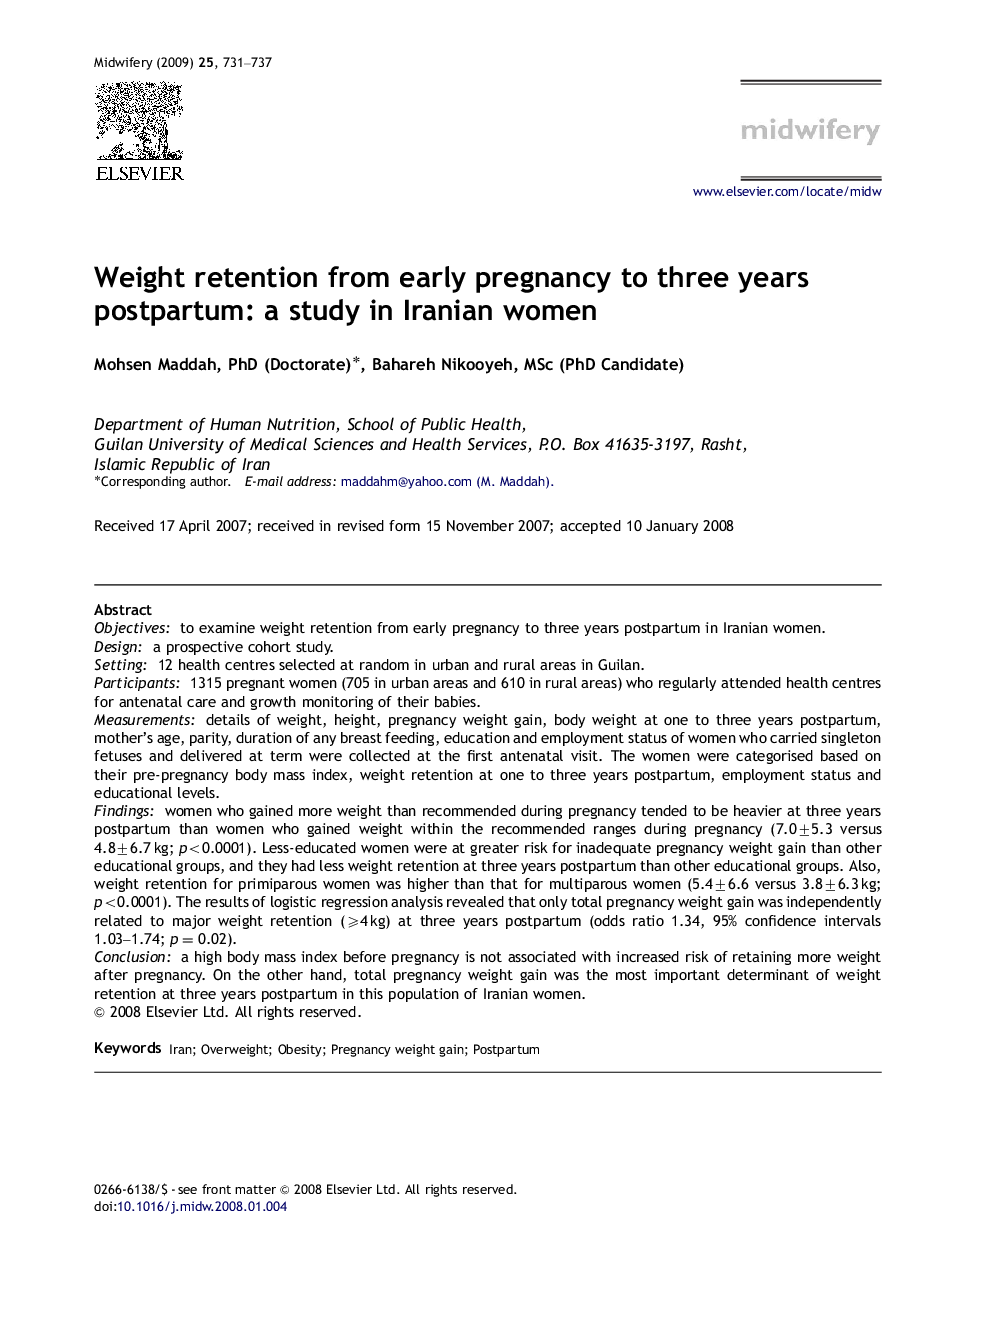 Weight retention from early pregnancy to three years postpartum: a study in Iranian women